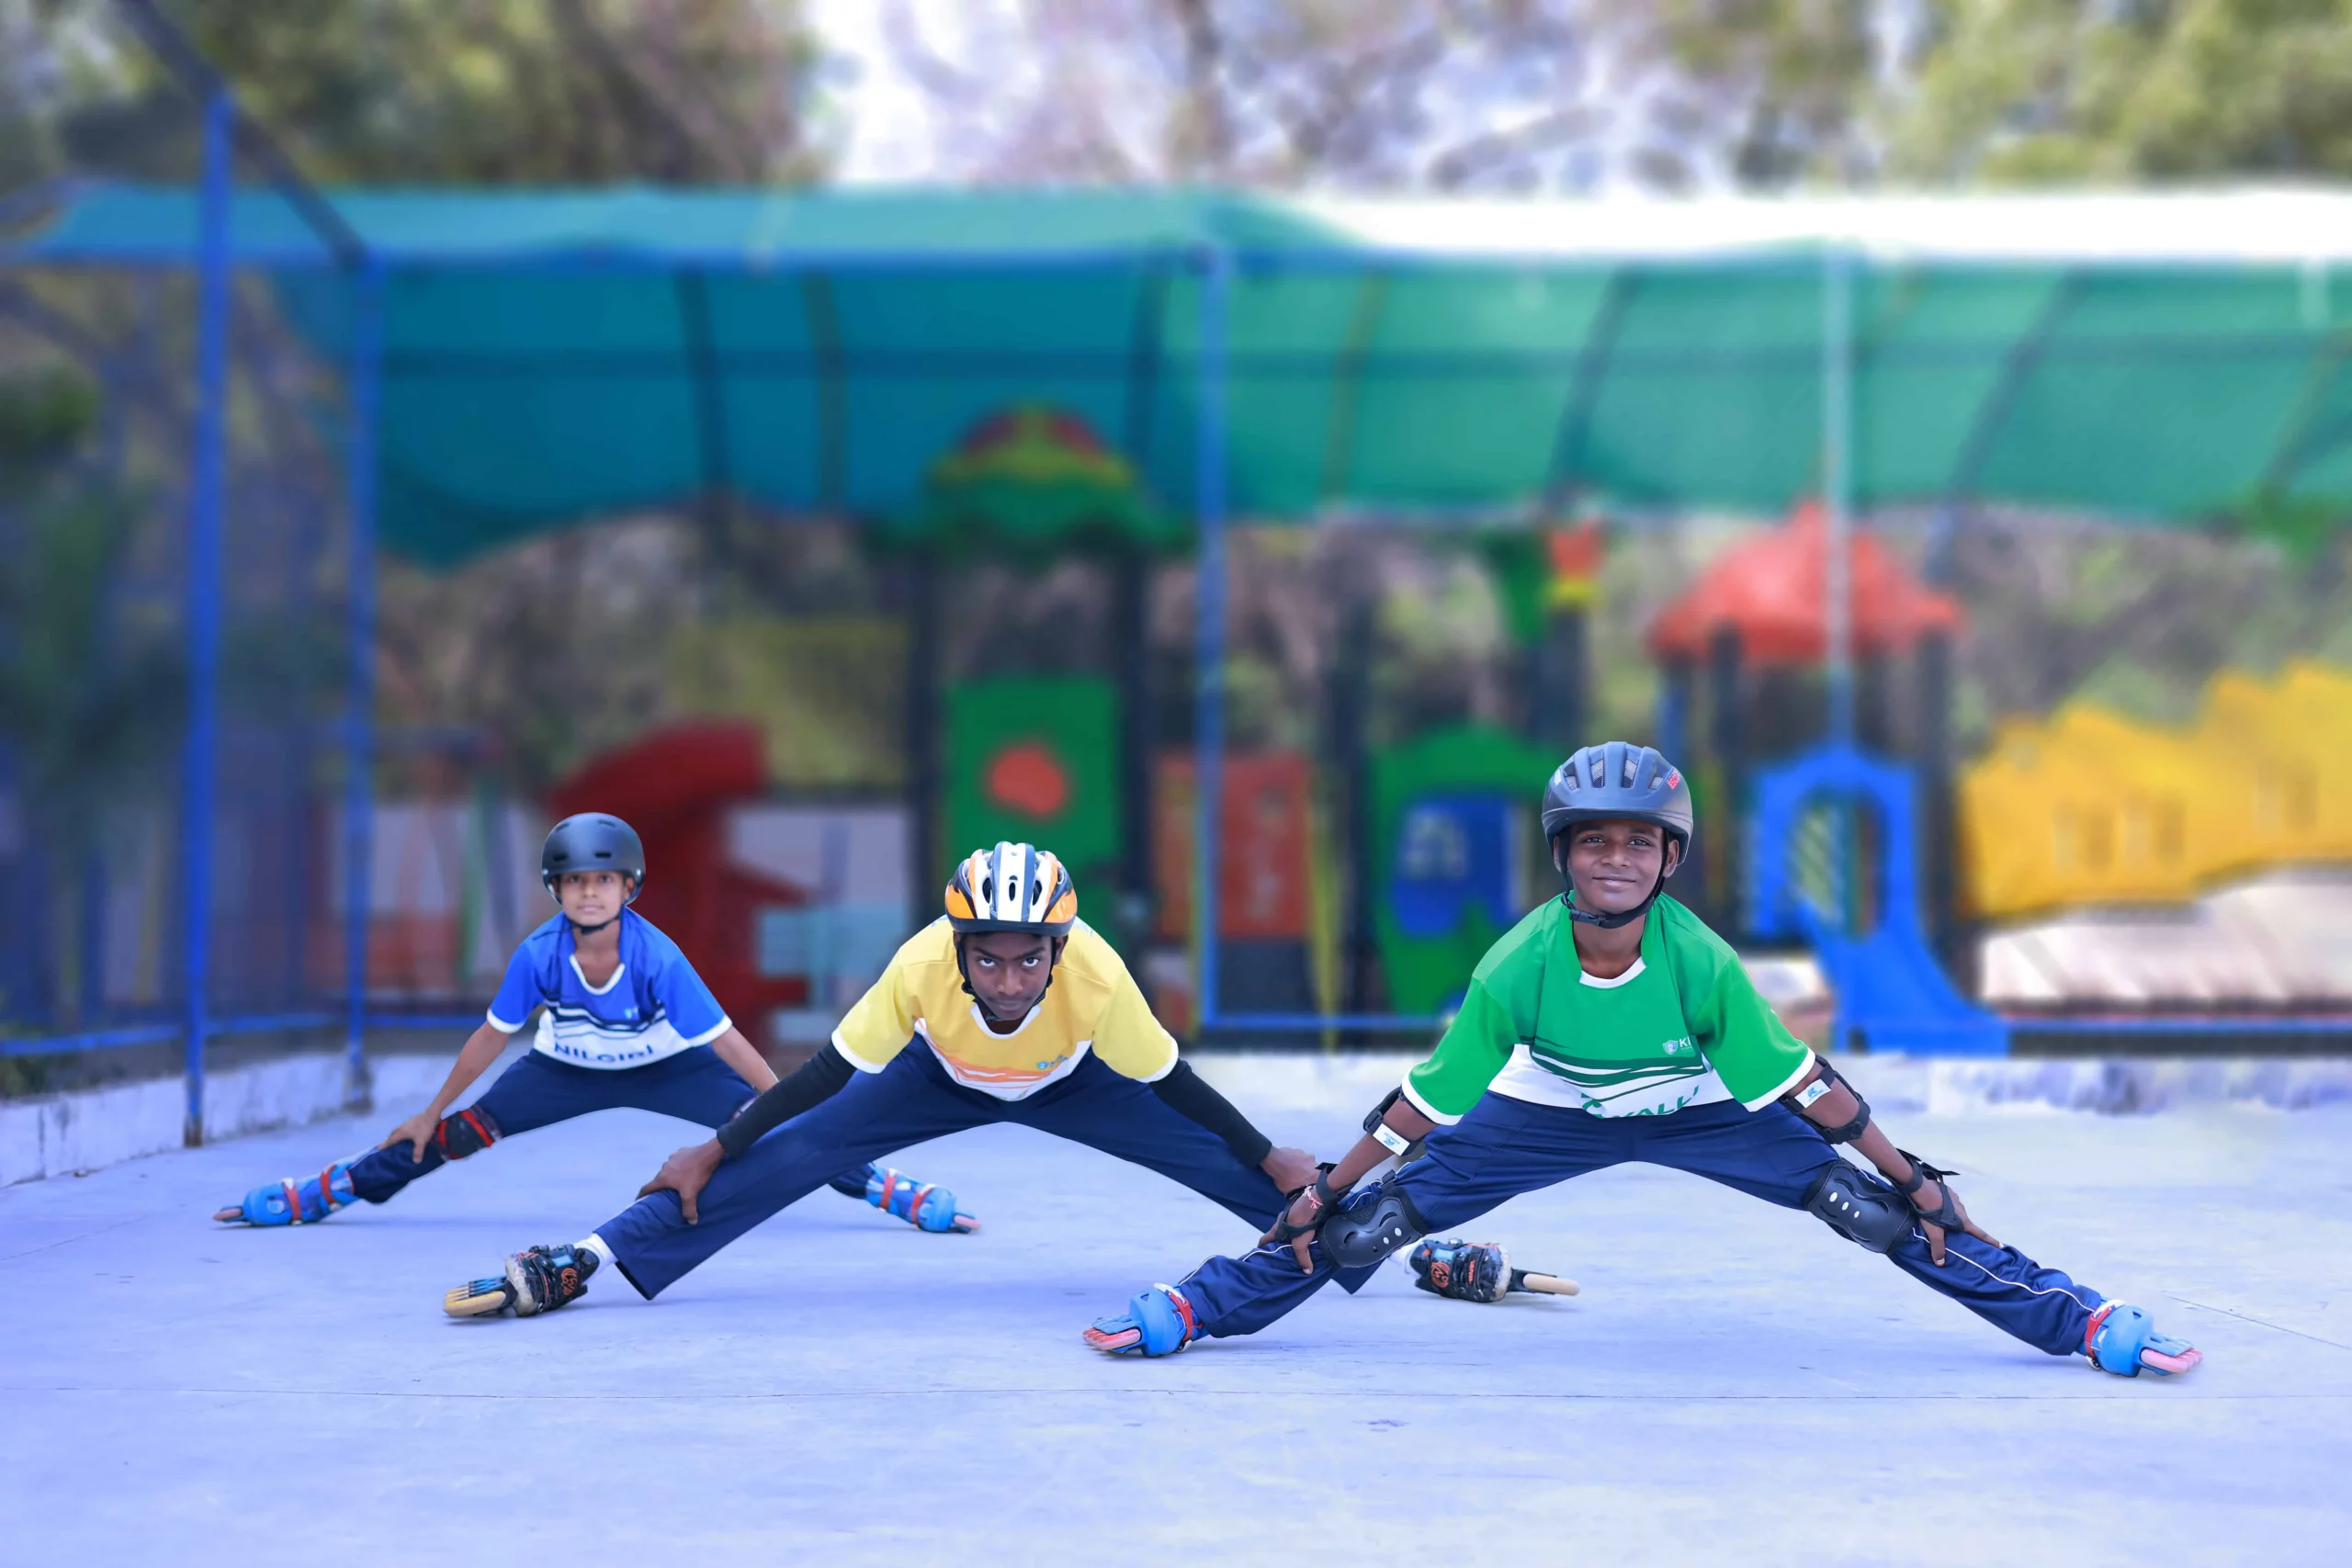 An action-packed moment captured during a skating session, showcasing the thrill and skill of individuals enjoying the sport on a smooth surface.